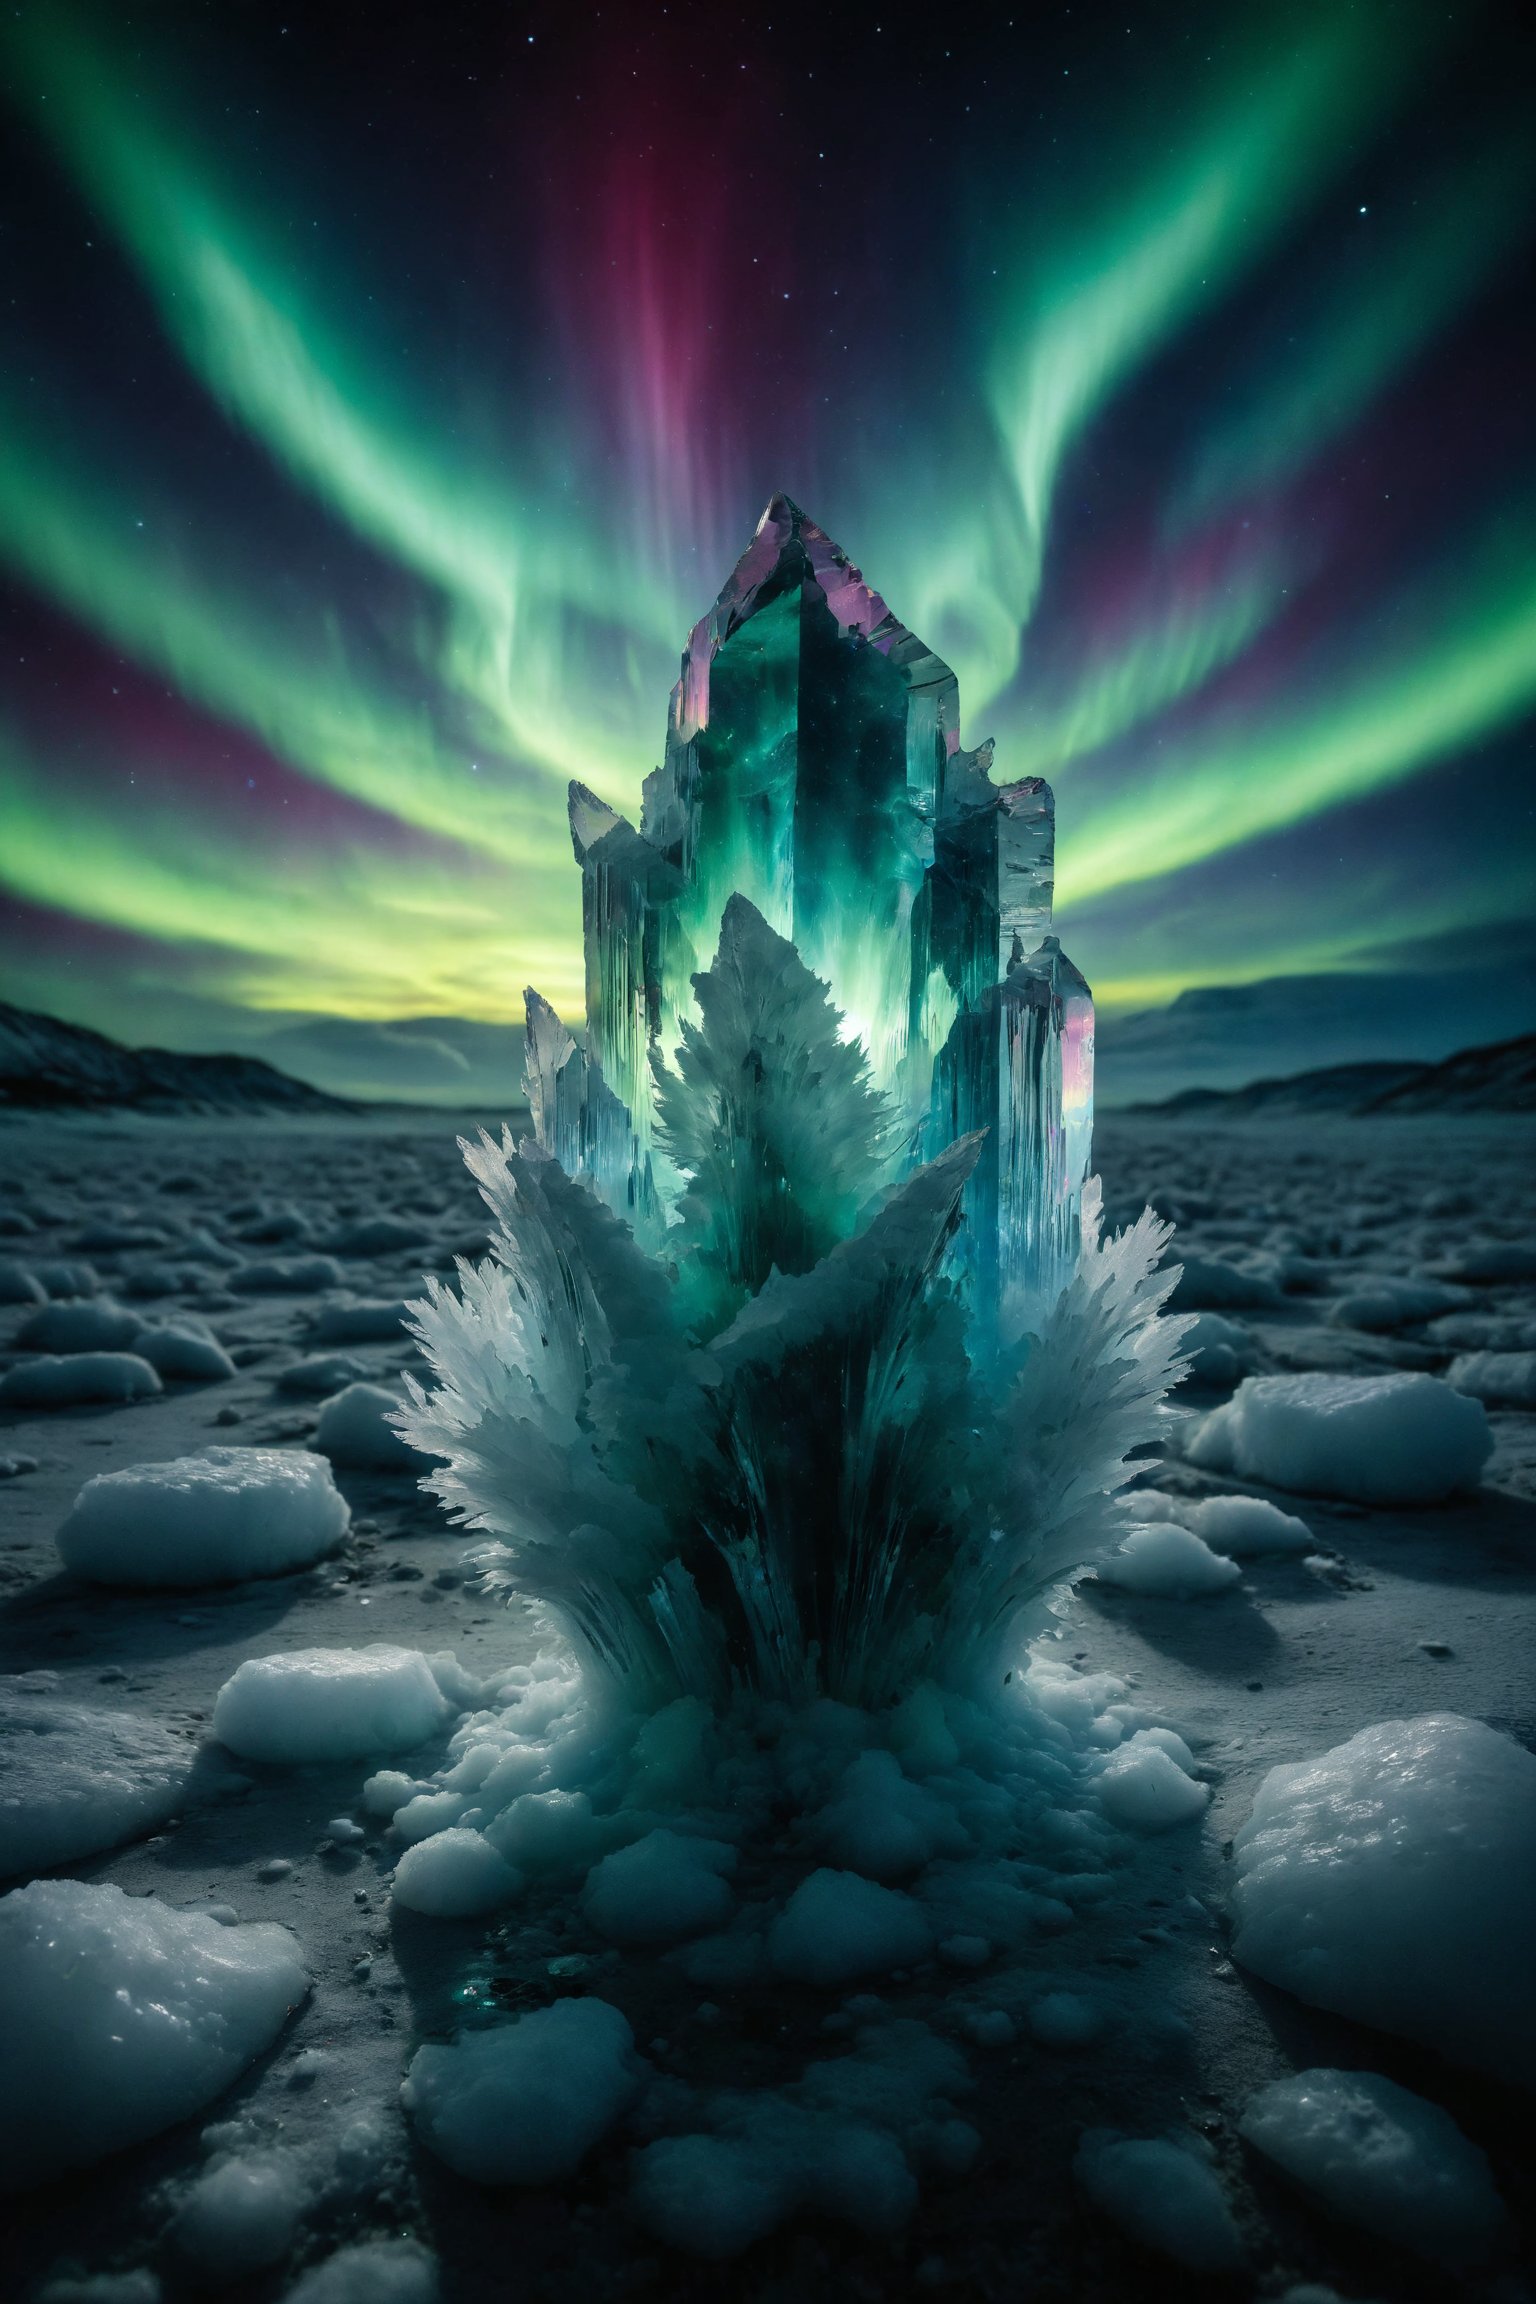 A giant, bright ice crystal emerging from the ground, reflecting the lights of the aurora borealis.